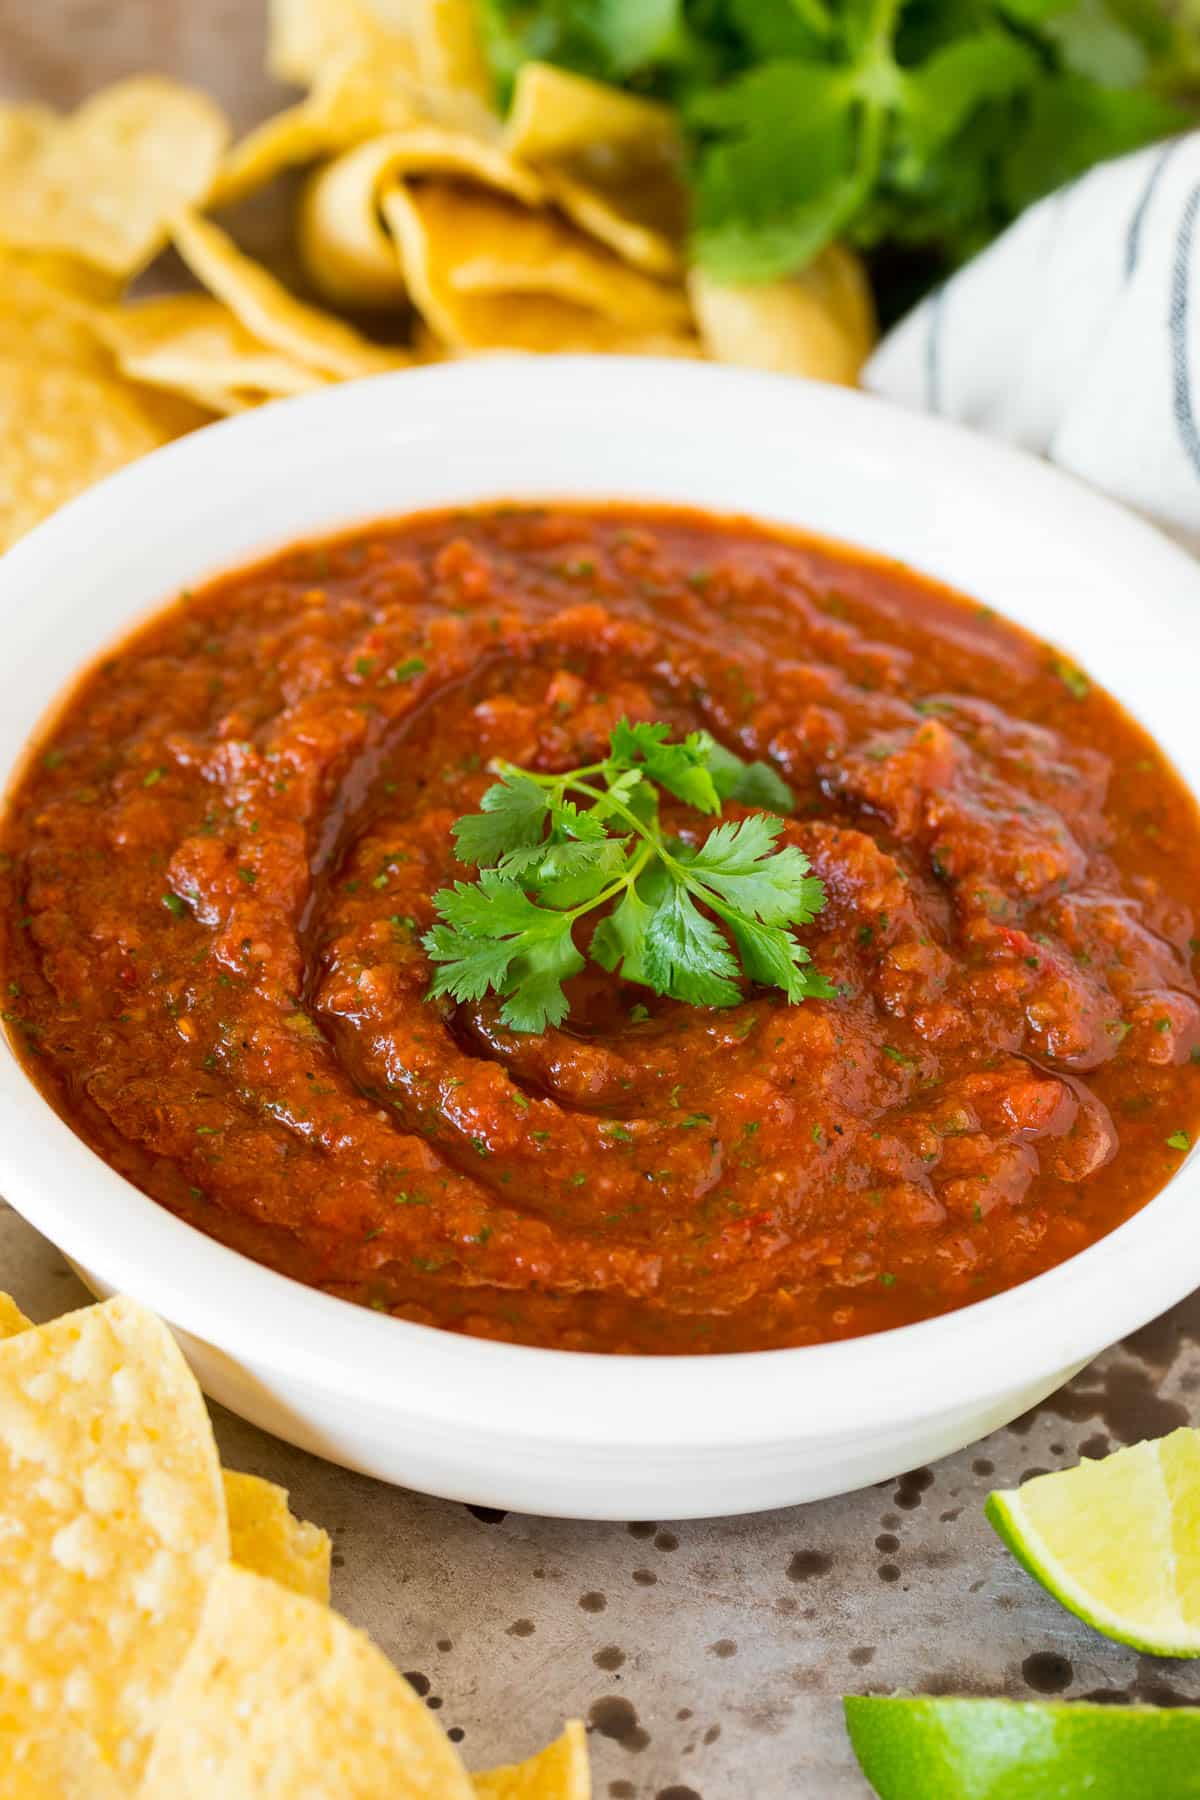 A bowl of chipotle salsa garnished with fresh cilantro.